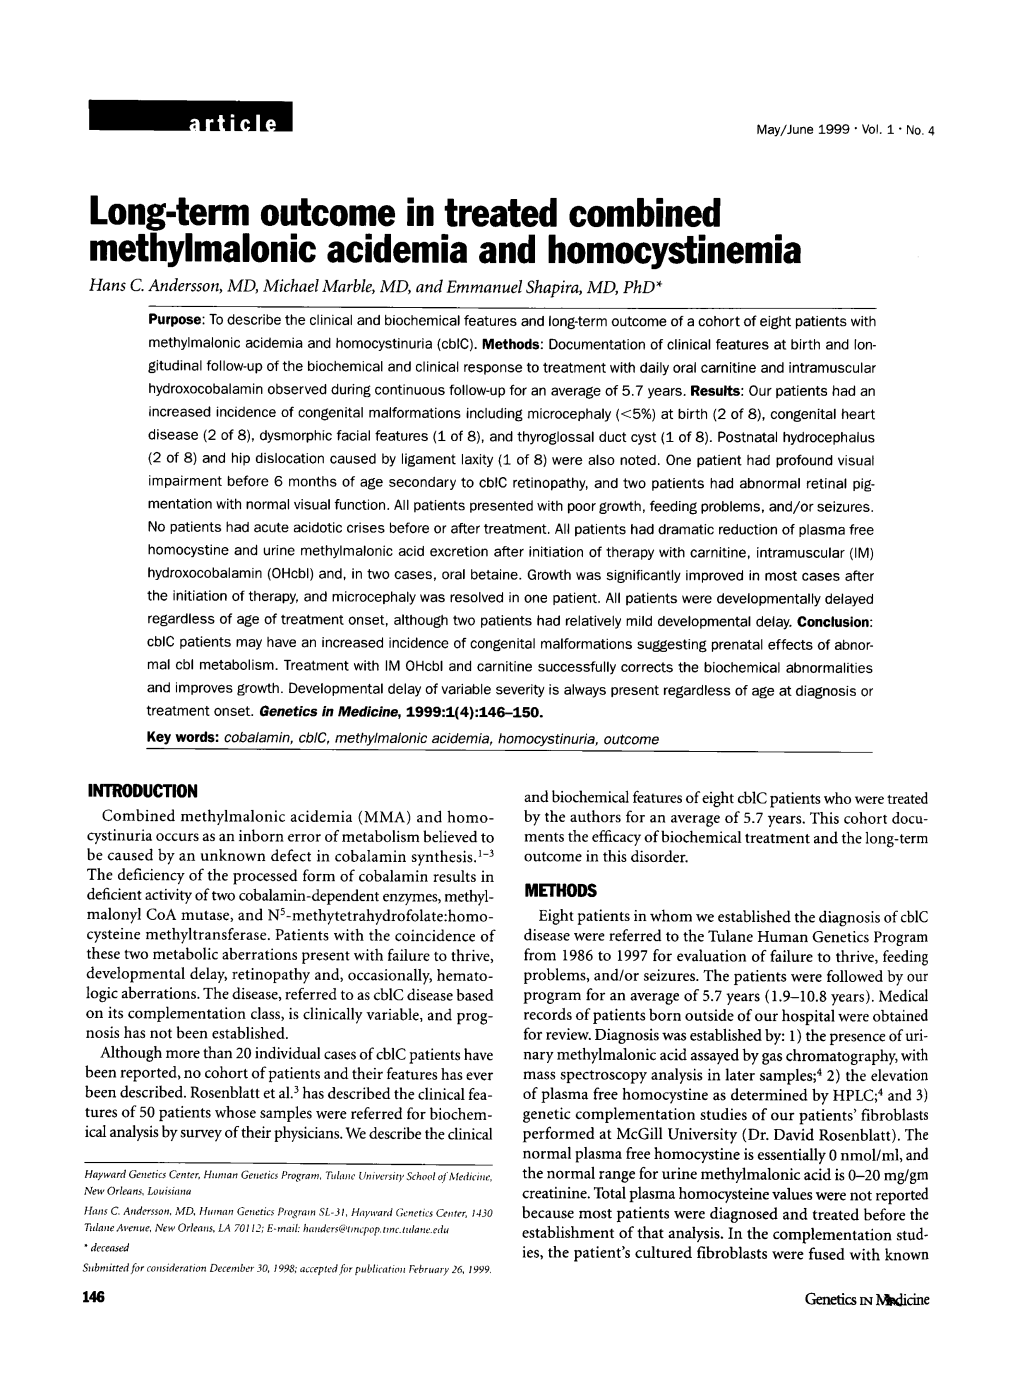 Long-Term Outcome in Treated Combined Methylmalonic Acidemia and Homocystinemia Hans C